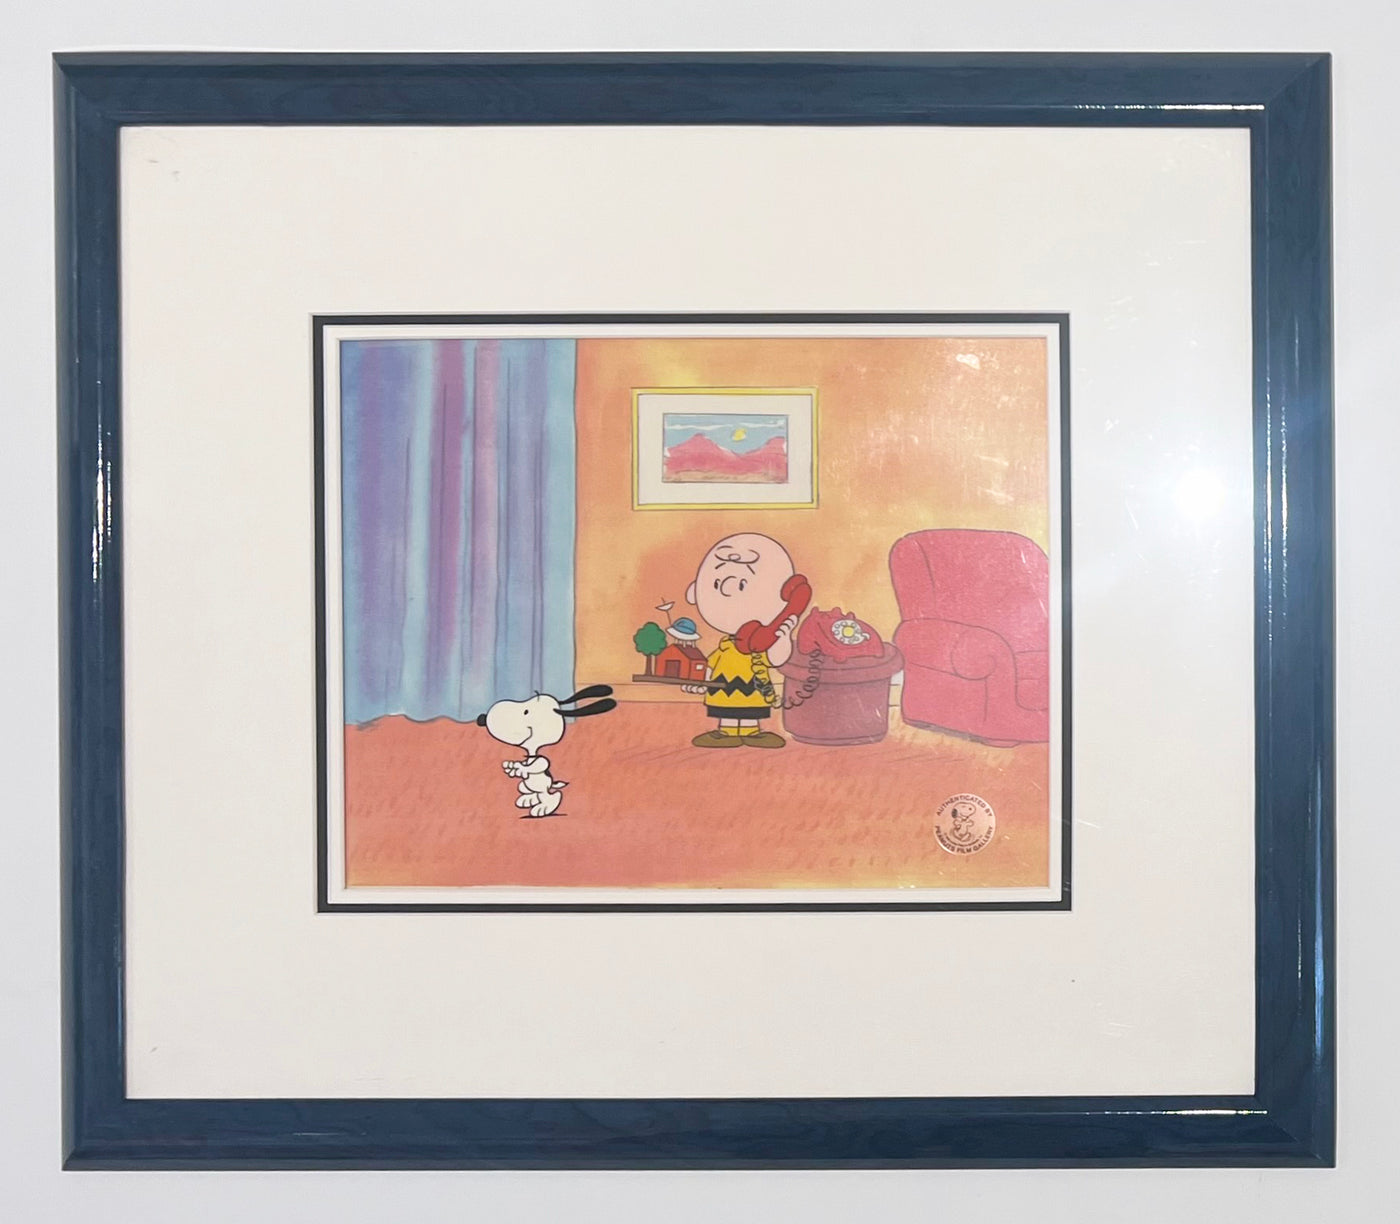 Original Peanuts Production Cel featuring Charlie Brown and Snoopy